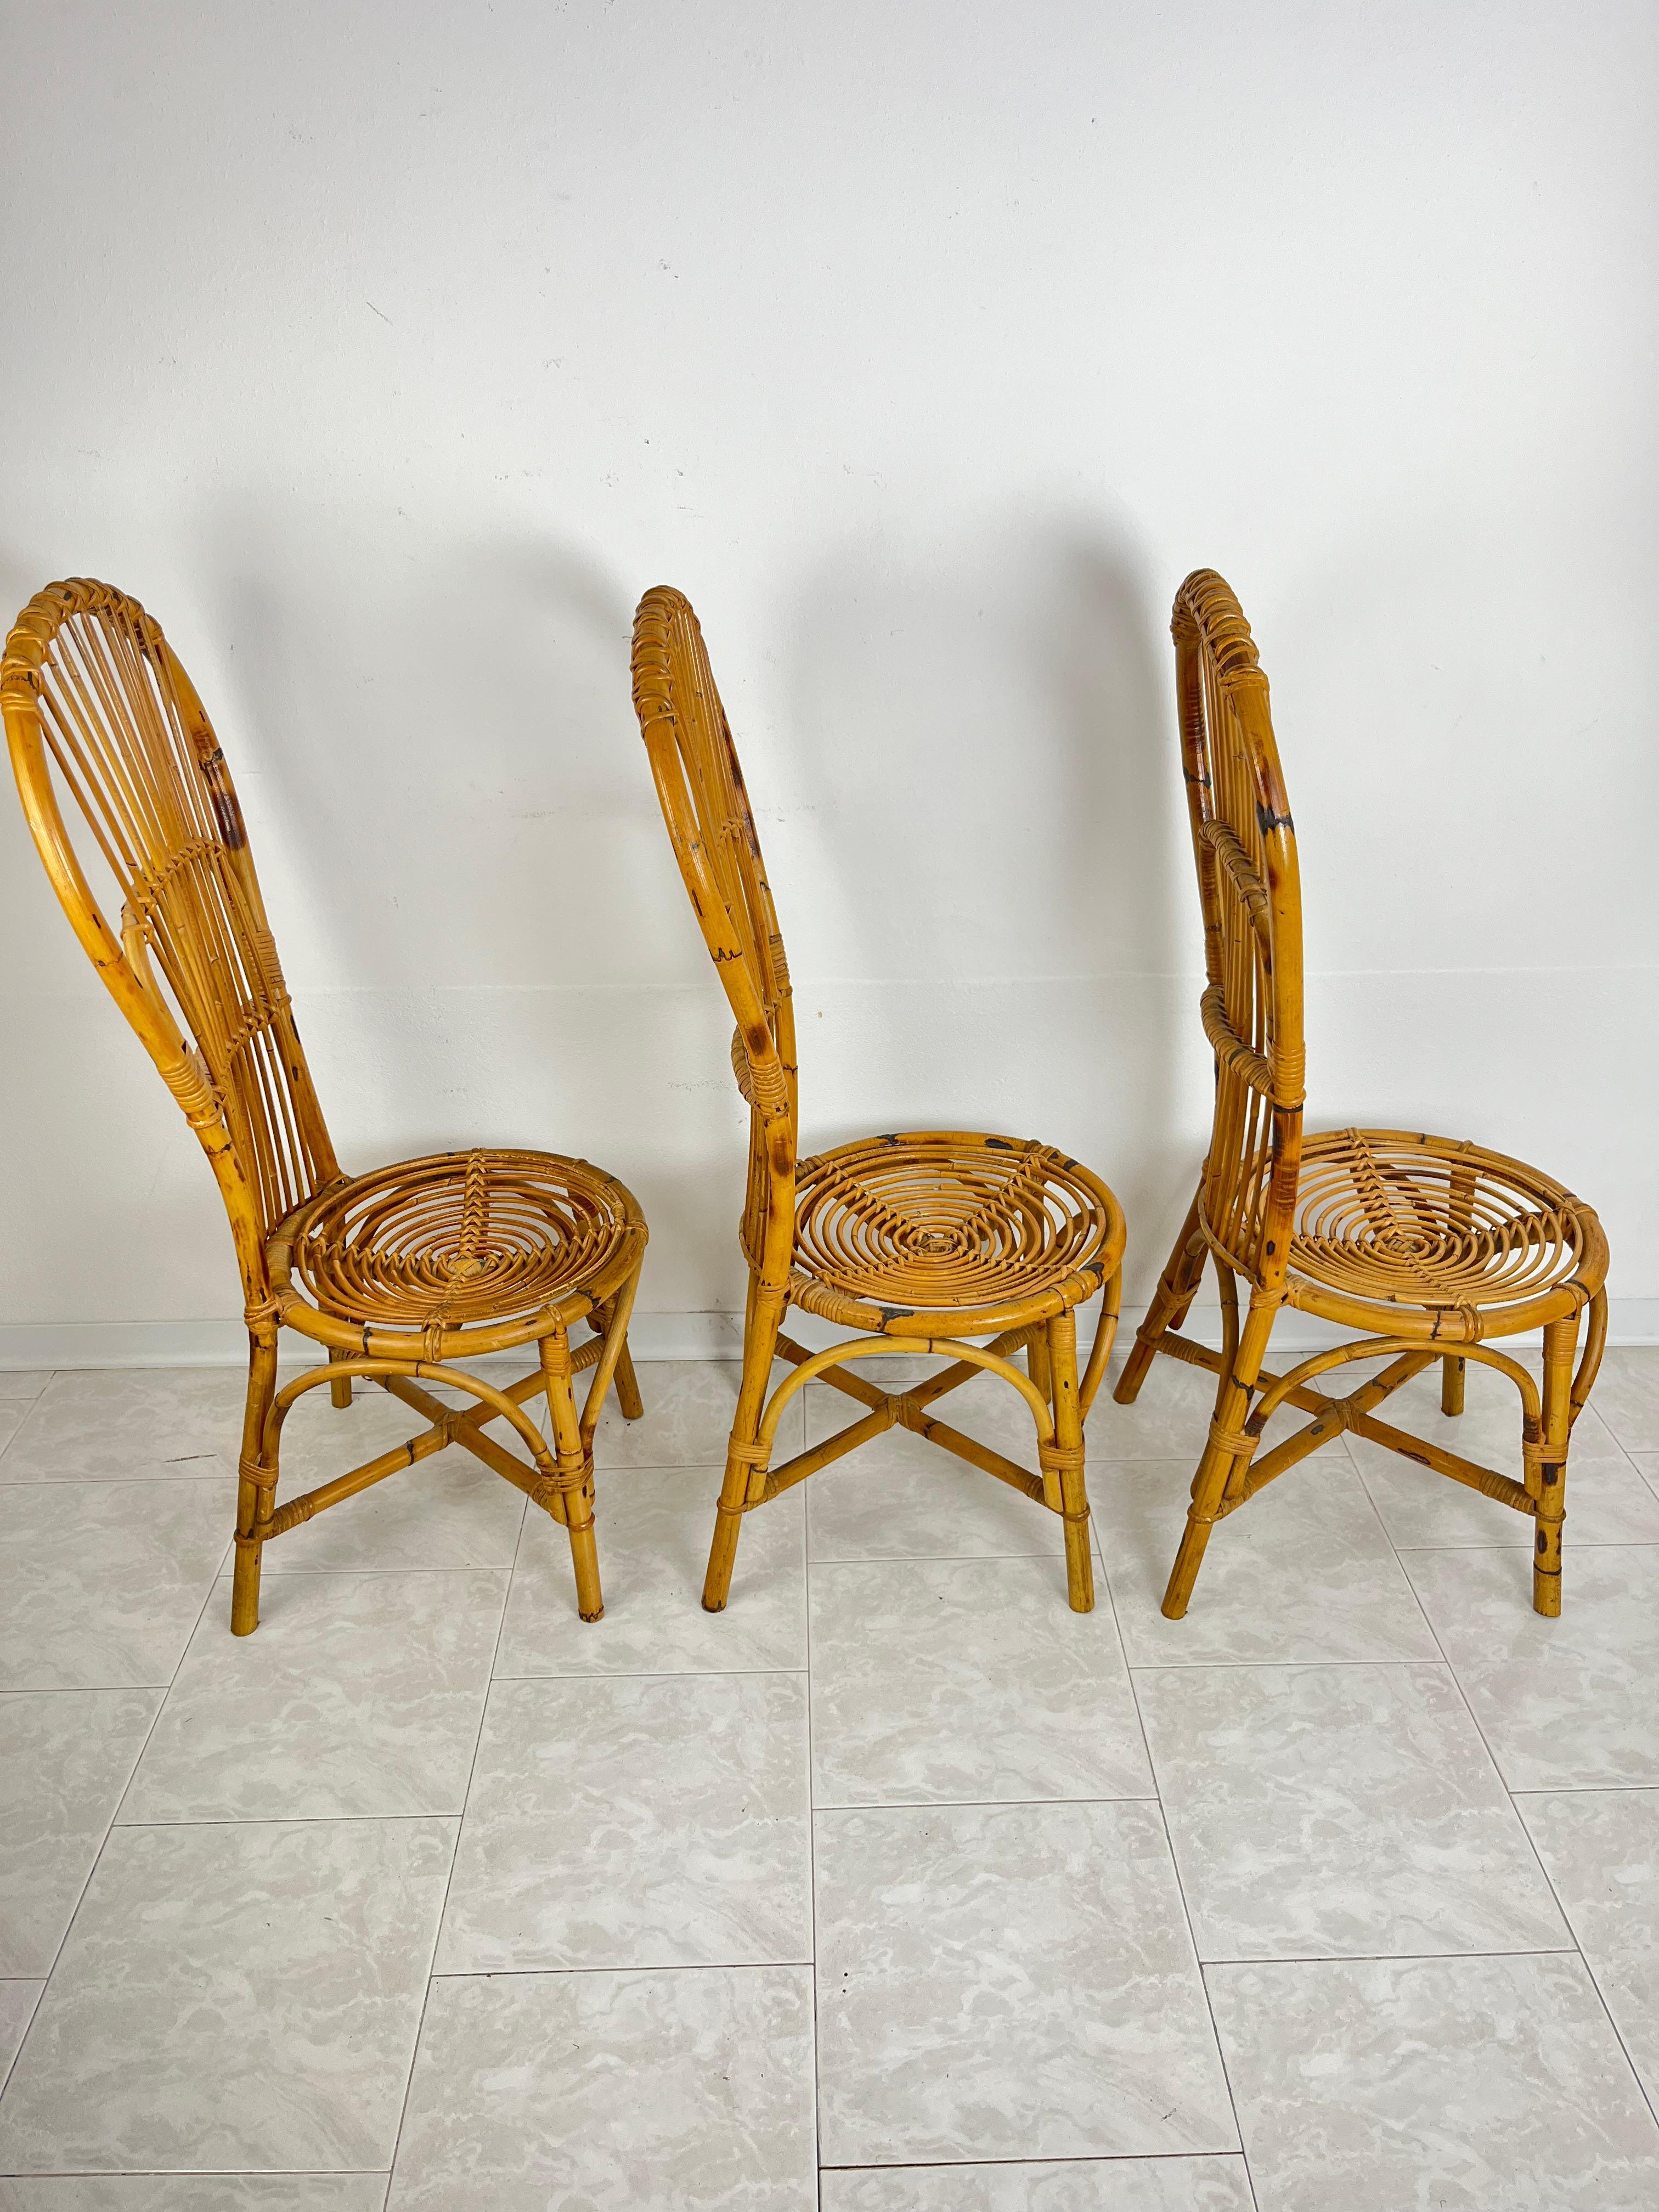 Set of 3 Mid-Century bamboo and rattan chairs with fan backs Italian design  1950s
Intact and in good condition, small signs of aging.